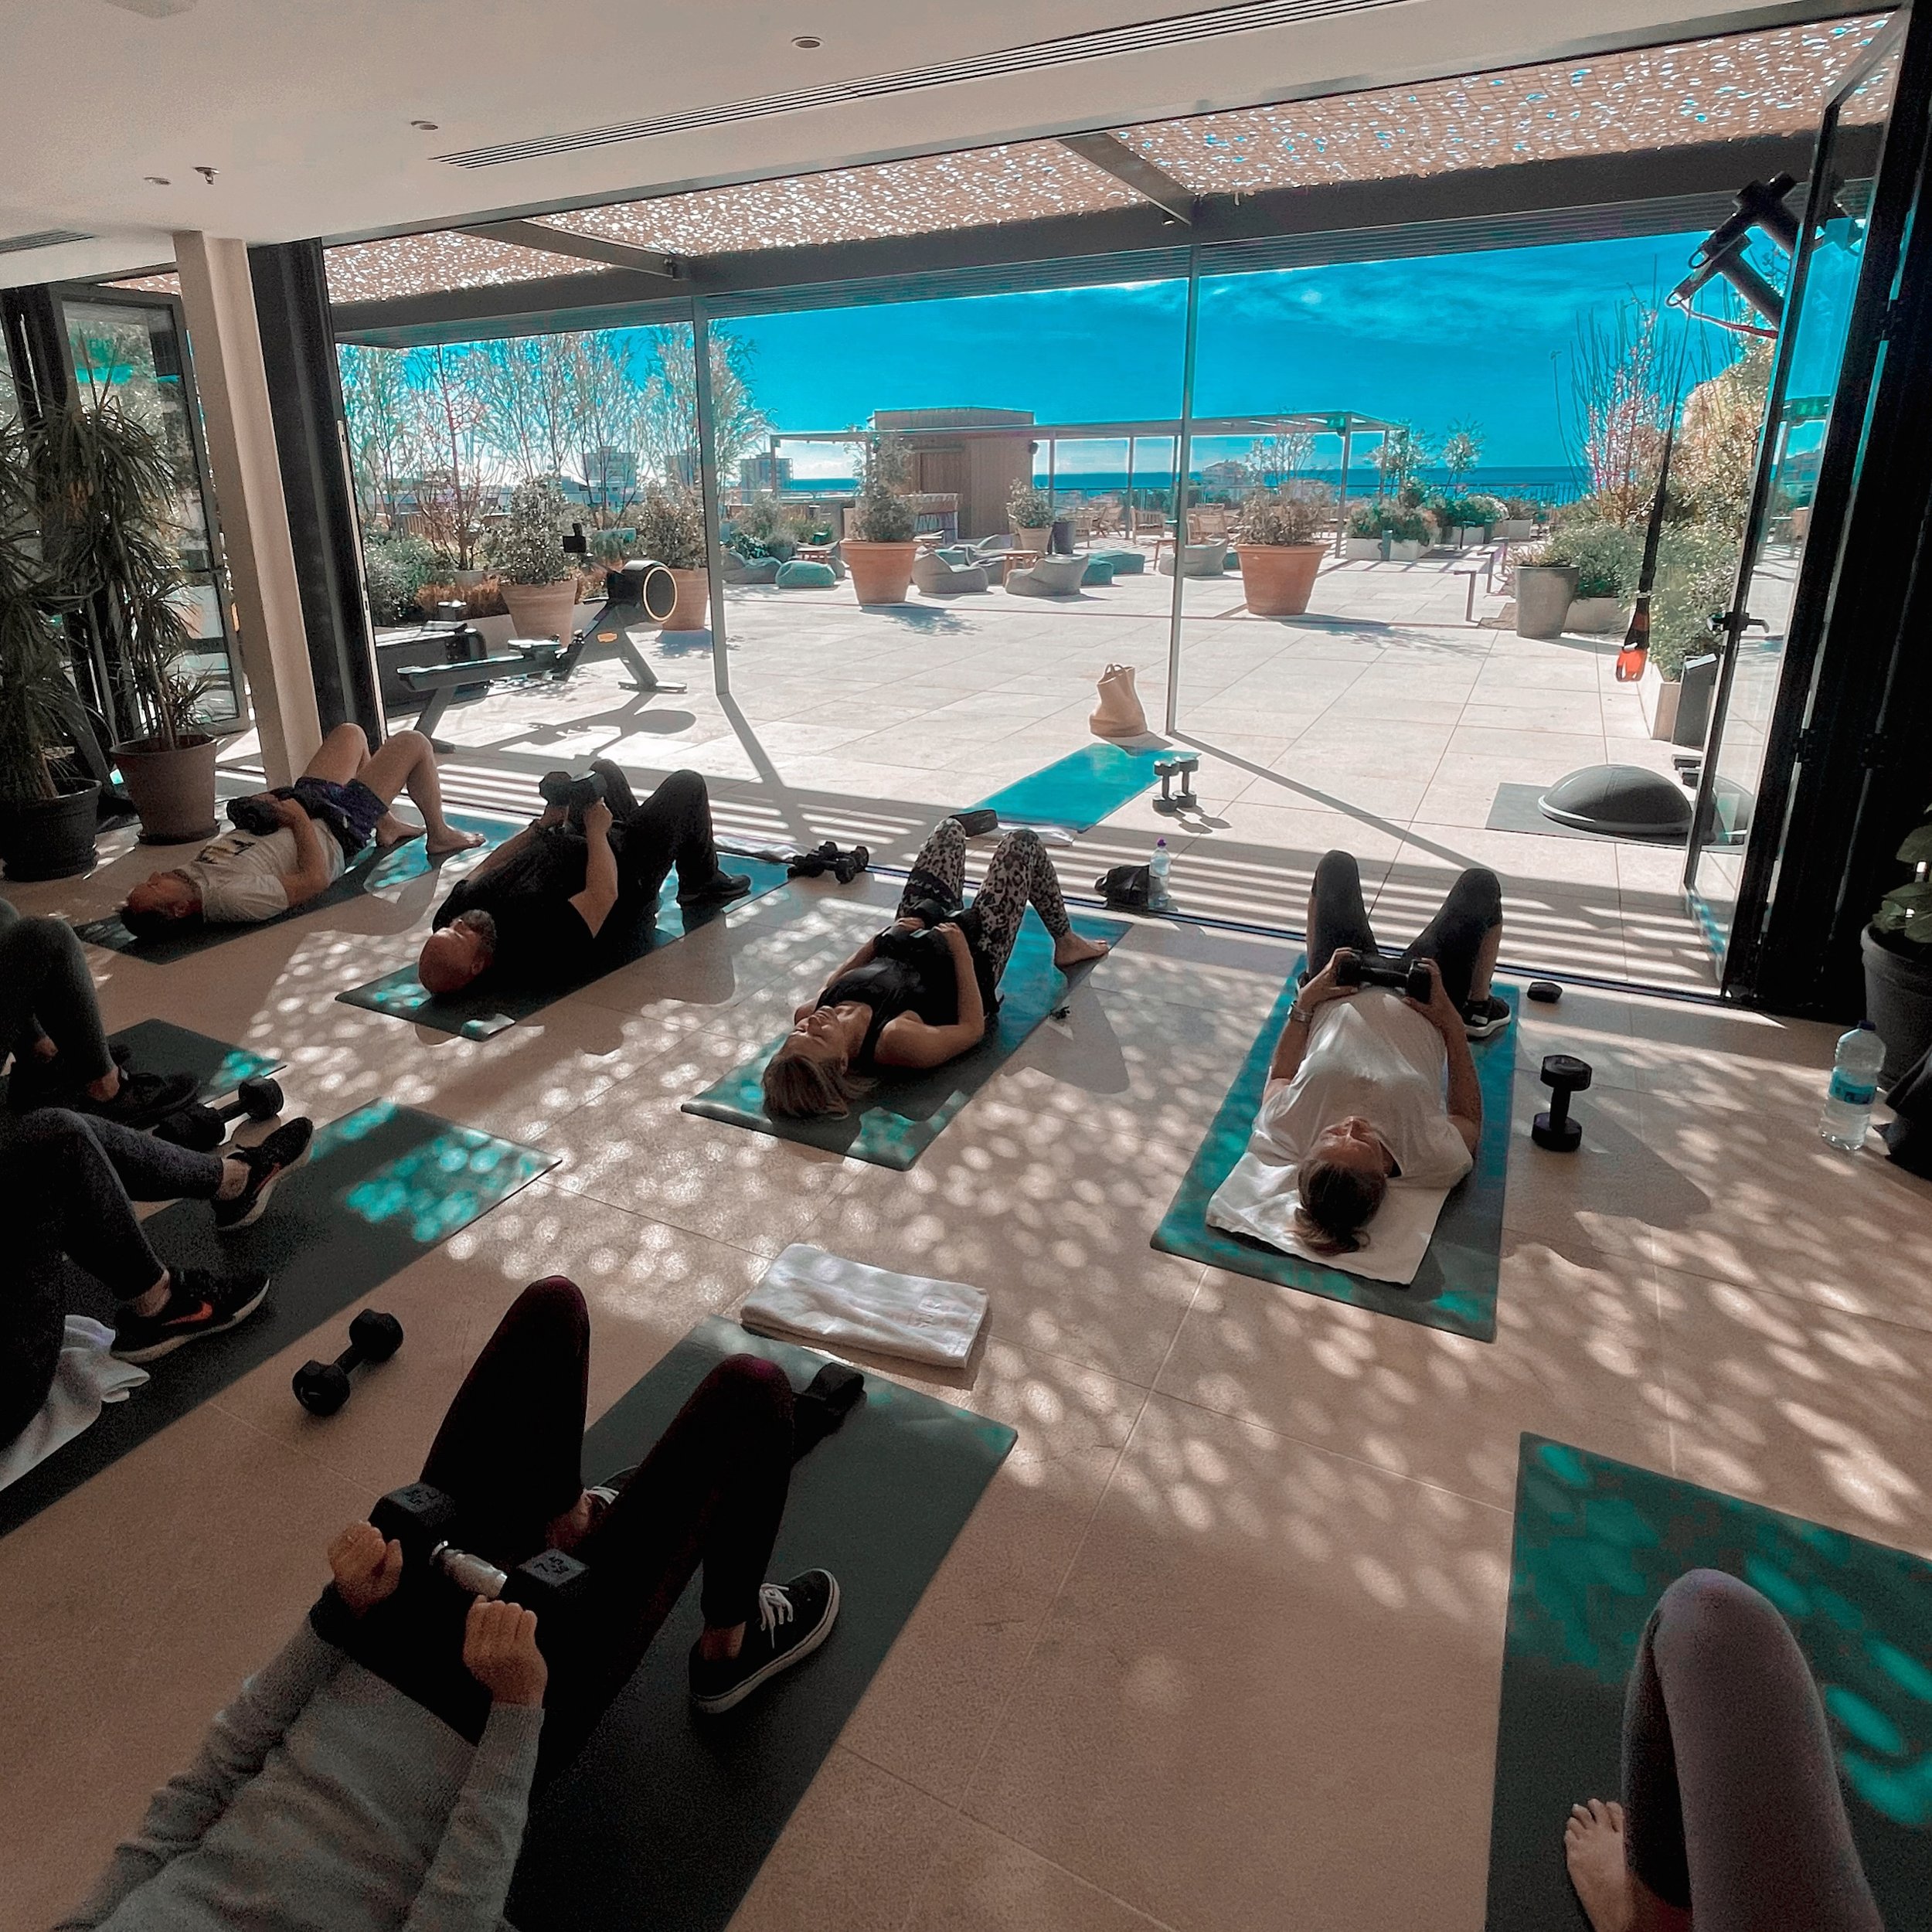 Get ready to work those glutes and strengthen your core! Join us for our Booty Core on Wednesday 9.30 with @robin_de_bock_ 

Don&rsquo;t miss out on the burn! 

#BootyCore #FitnessGoals #WorkoutWednesday #StudioWithAView #SitgessFitness #SitgesAnyTim